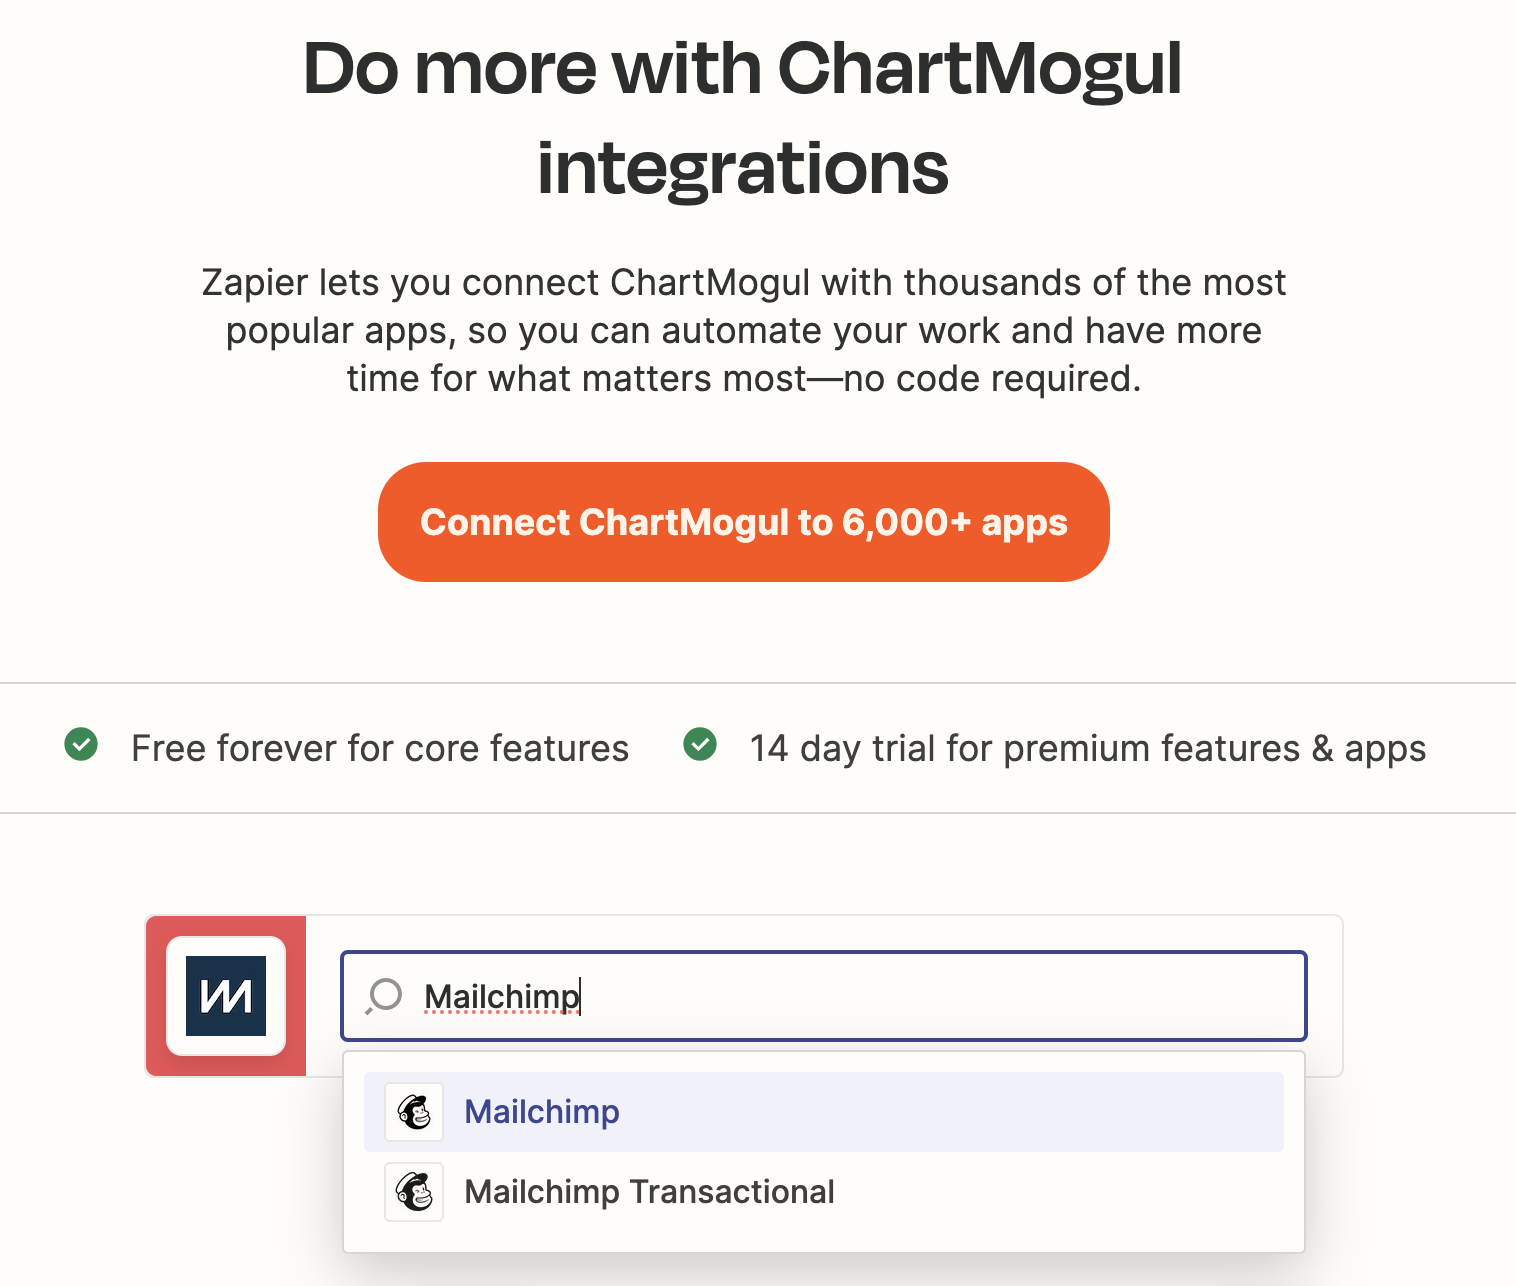 Screenshot of Zapier’s ChartMogul integrations page with search results for Mailchimp.